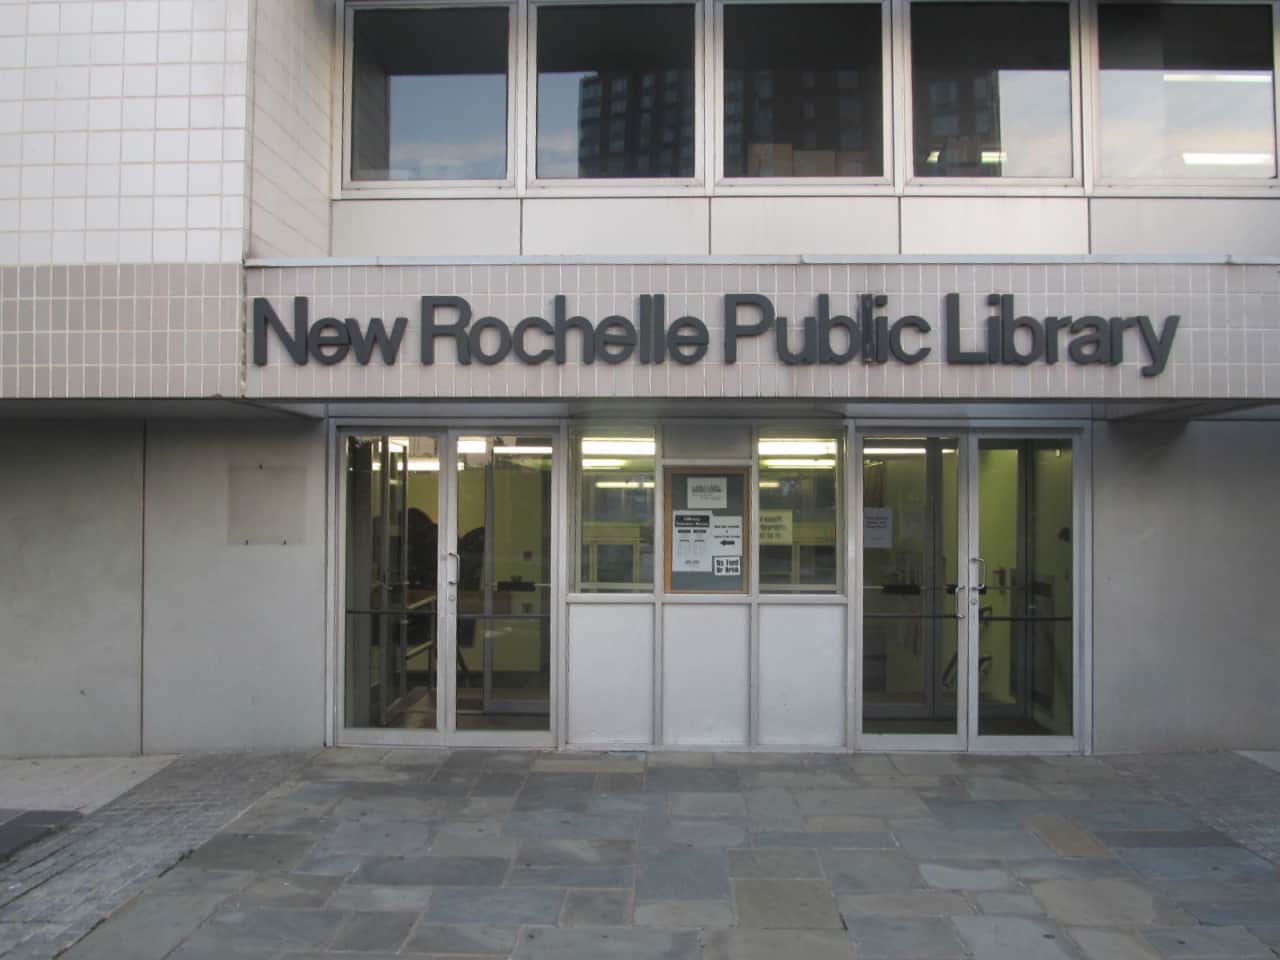 Registration is now open for English as a second language courses being held at the New Rochelle Public Library. 